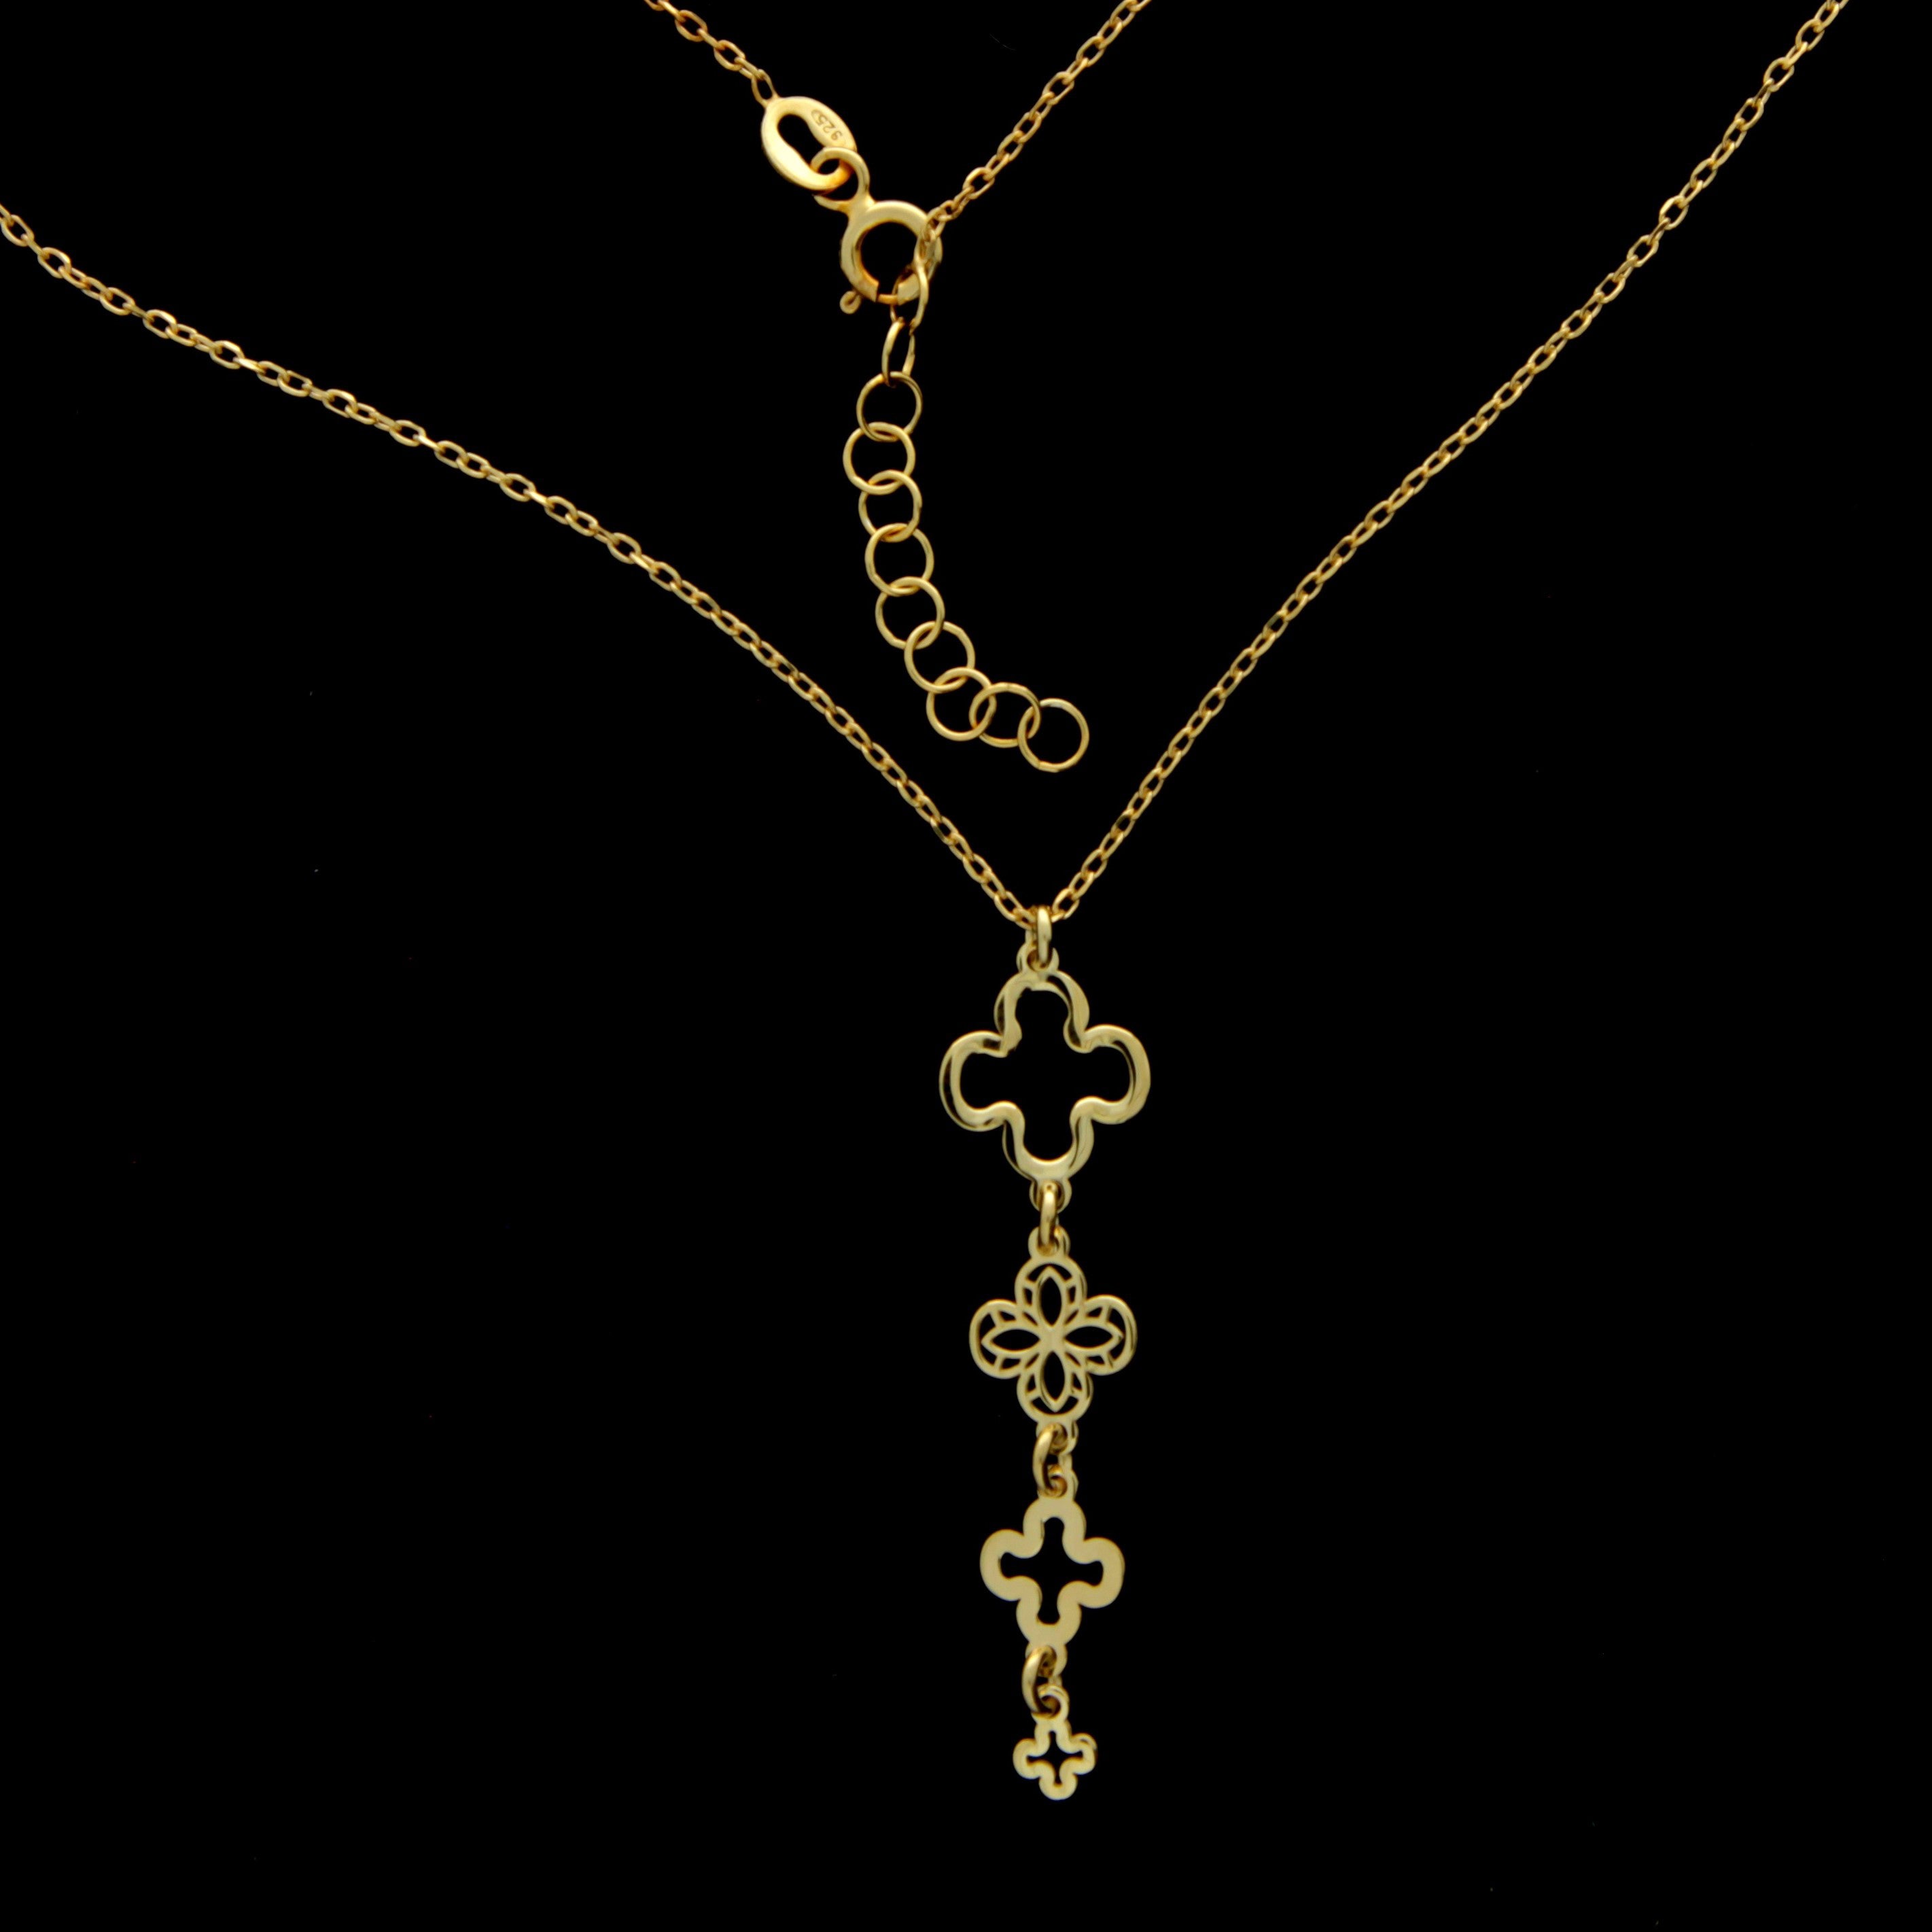 925 Sterling Silver Gold Plated Link of Clovers Necklace - IT-012-N